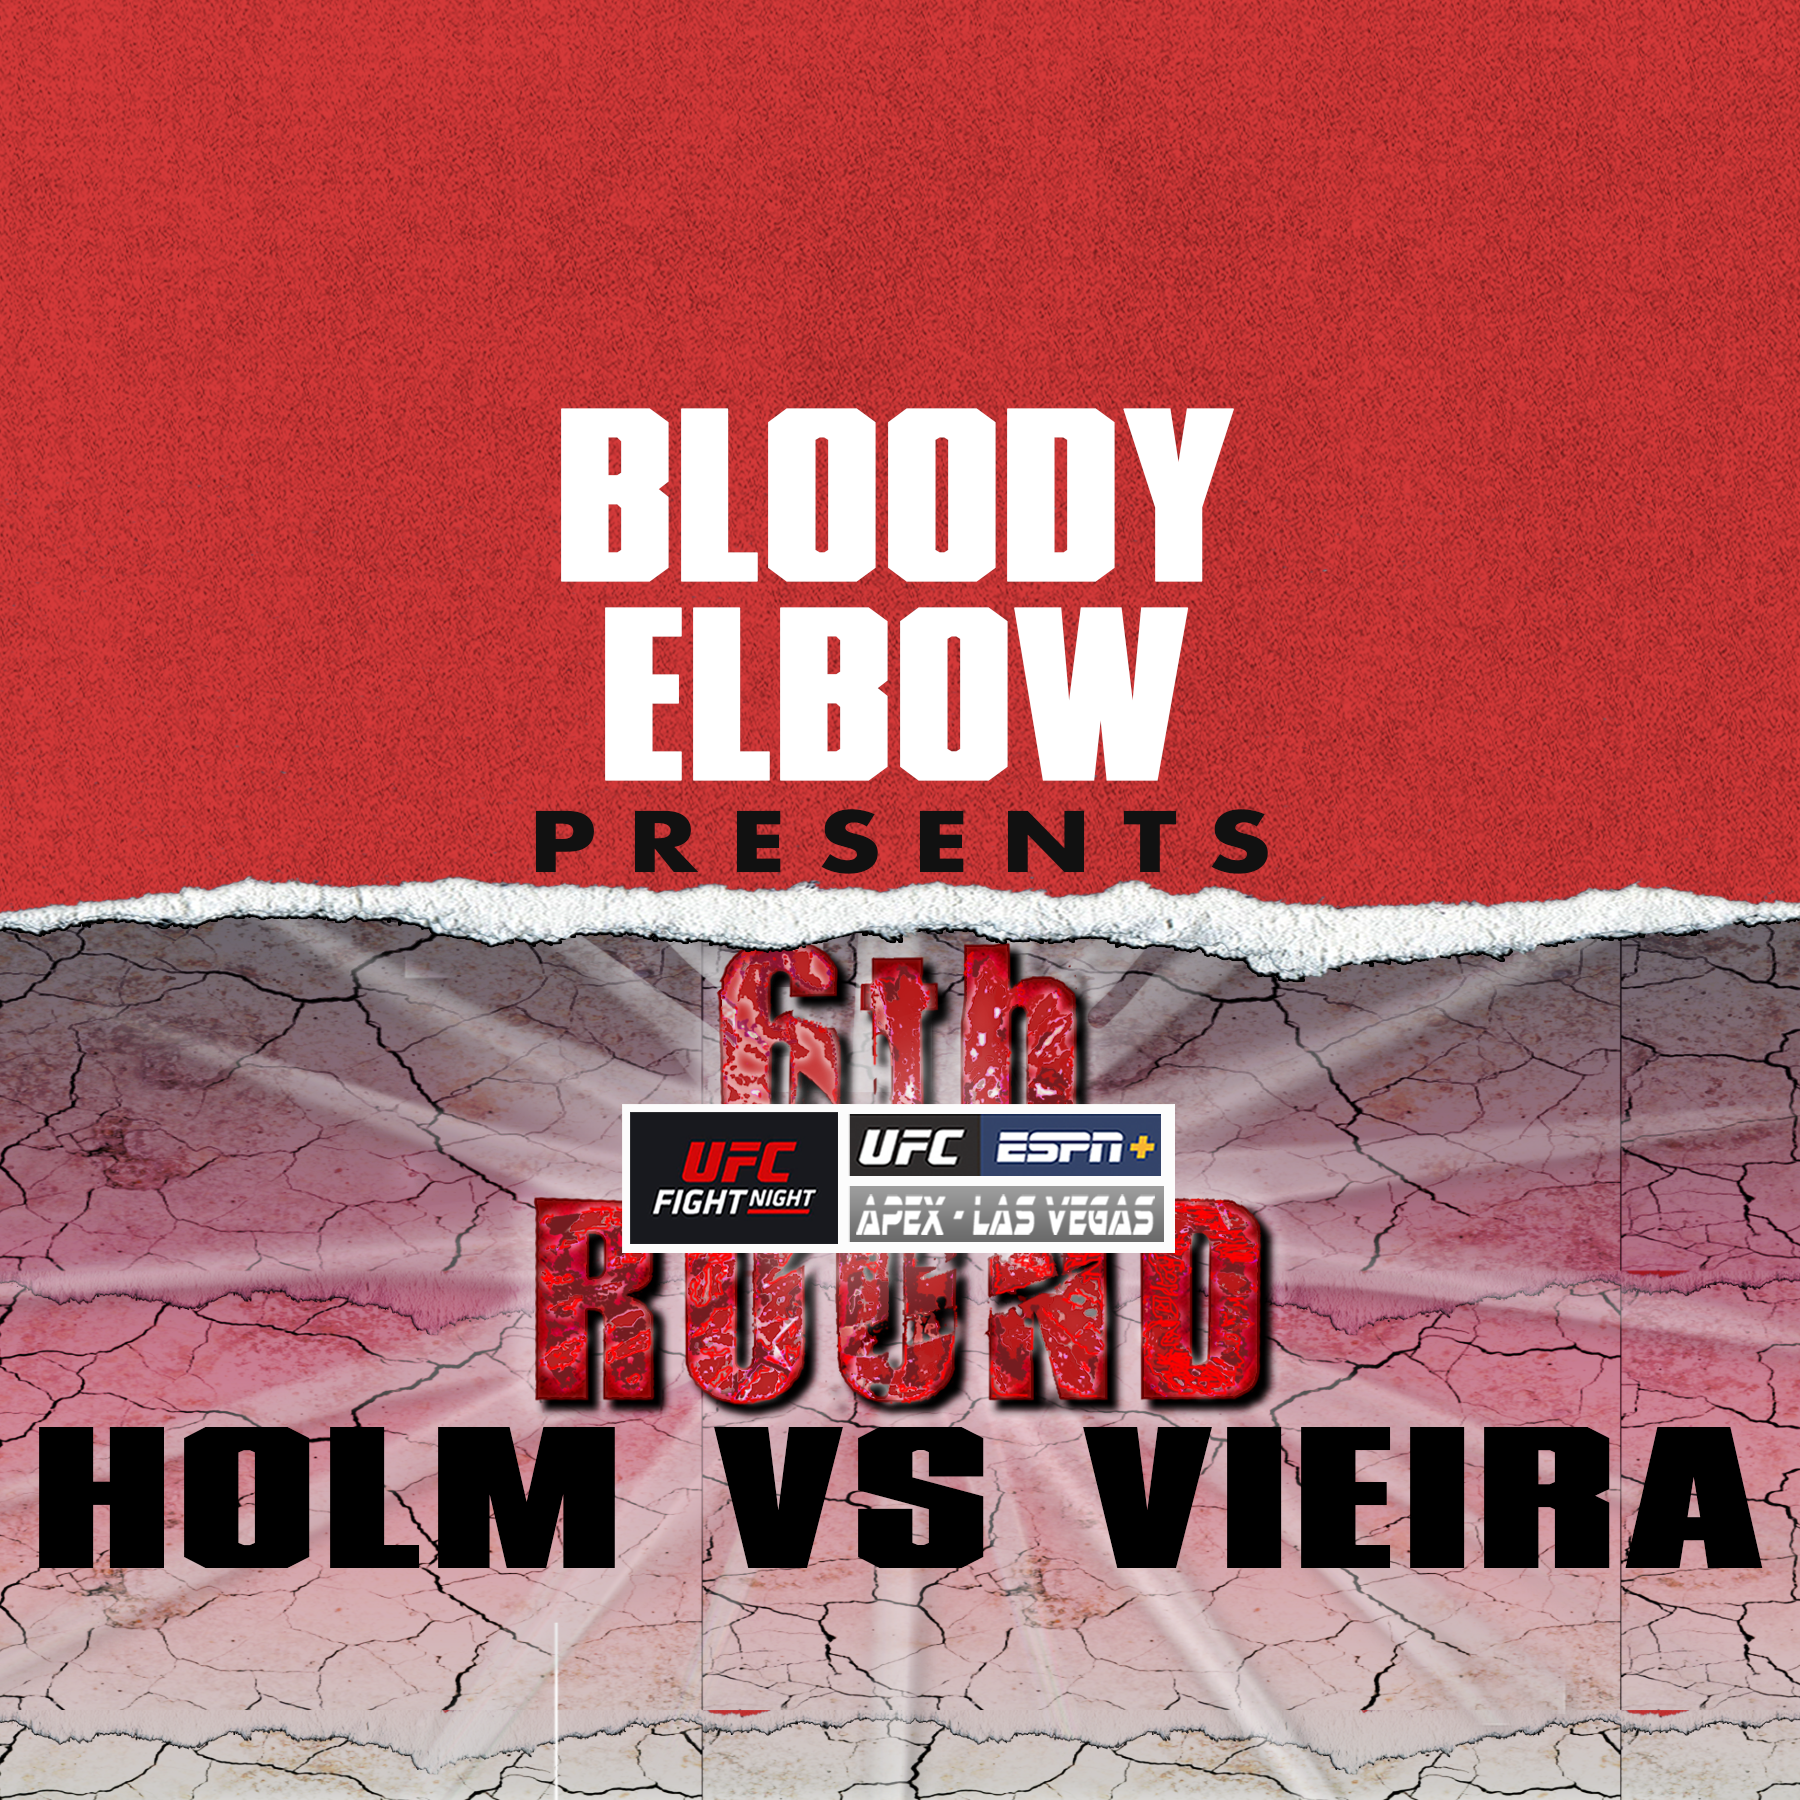 Post-Fight Show, UFC Post-Fight Show, 6th Rd, 6th Round Post-Fight Show, Zane Simon, Eddie Mercado, UFC Results, UFC Reactions, UFC Hot Takes, UFC Possible Next Fights, UFC Vegas 55, UFC Fight Night, Holly Holm vs Ketlen Vieira,